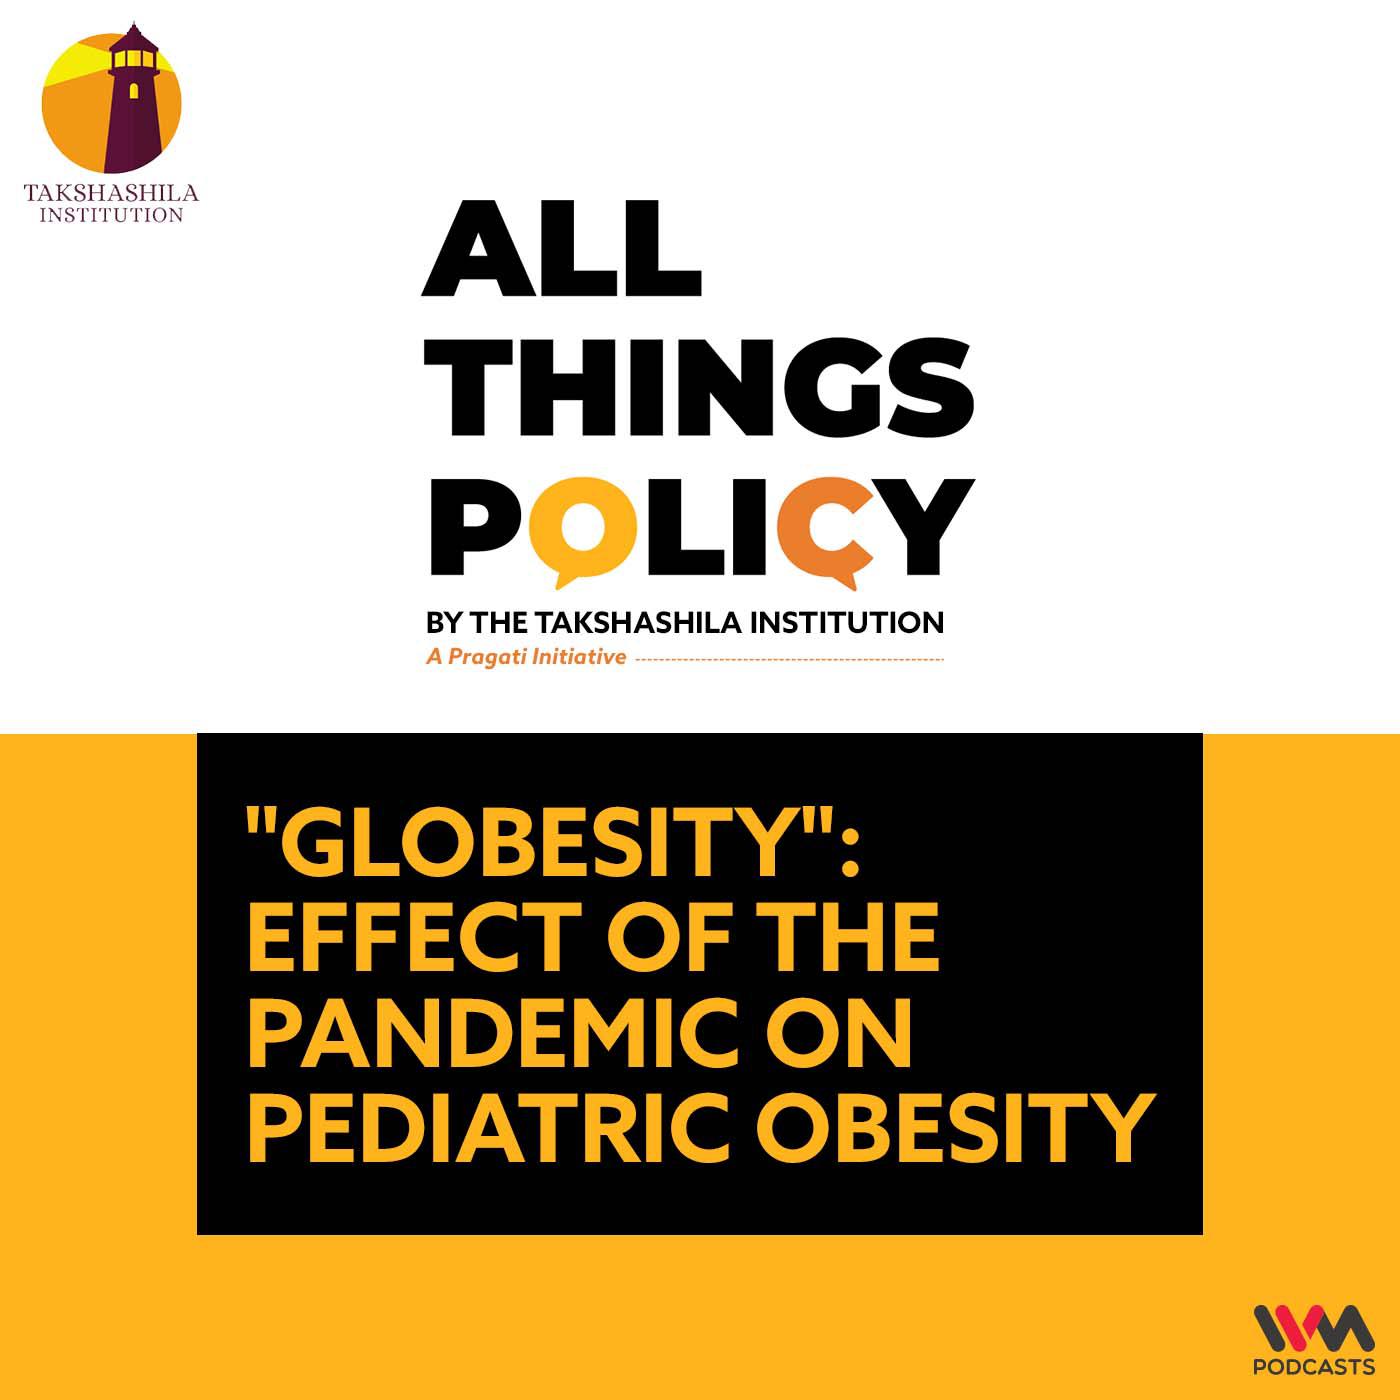 Effect of the Pandemic on Pediatric Obesity